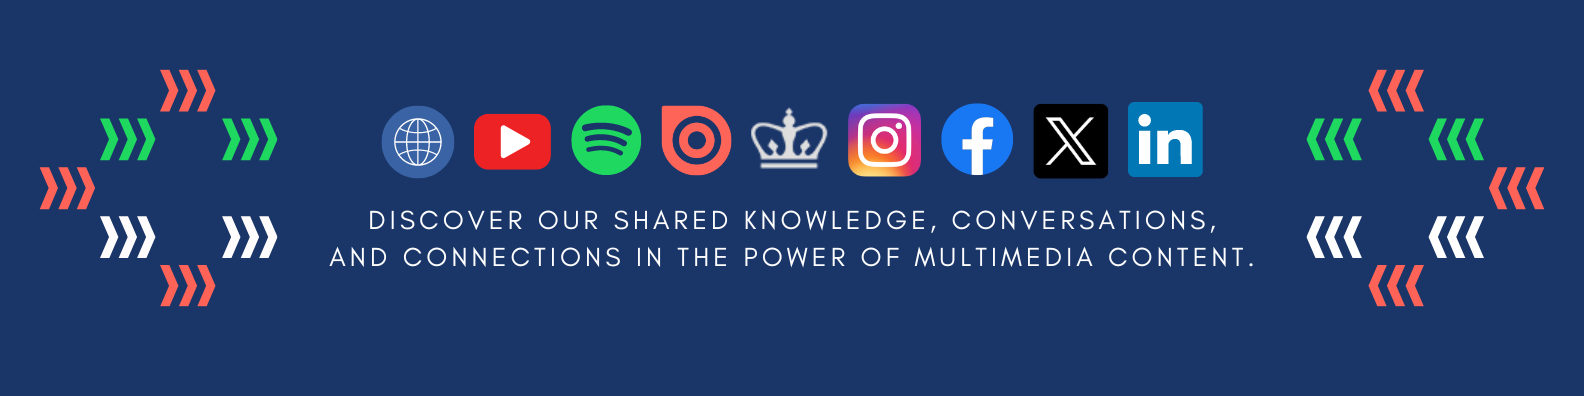 Media Hub: Discover our shared knowledge, conversations, and connections in the power of multimedia content.